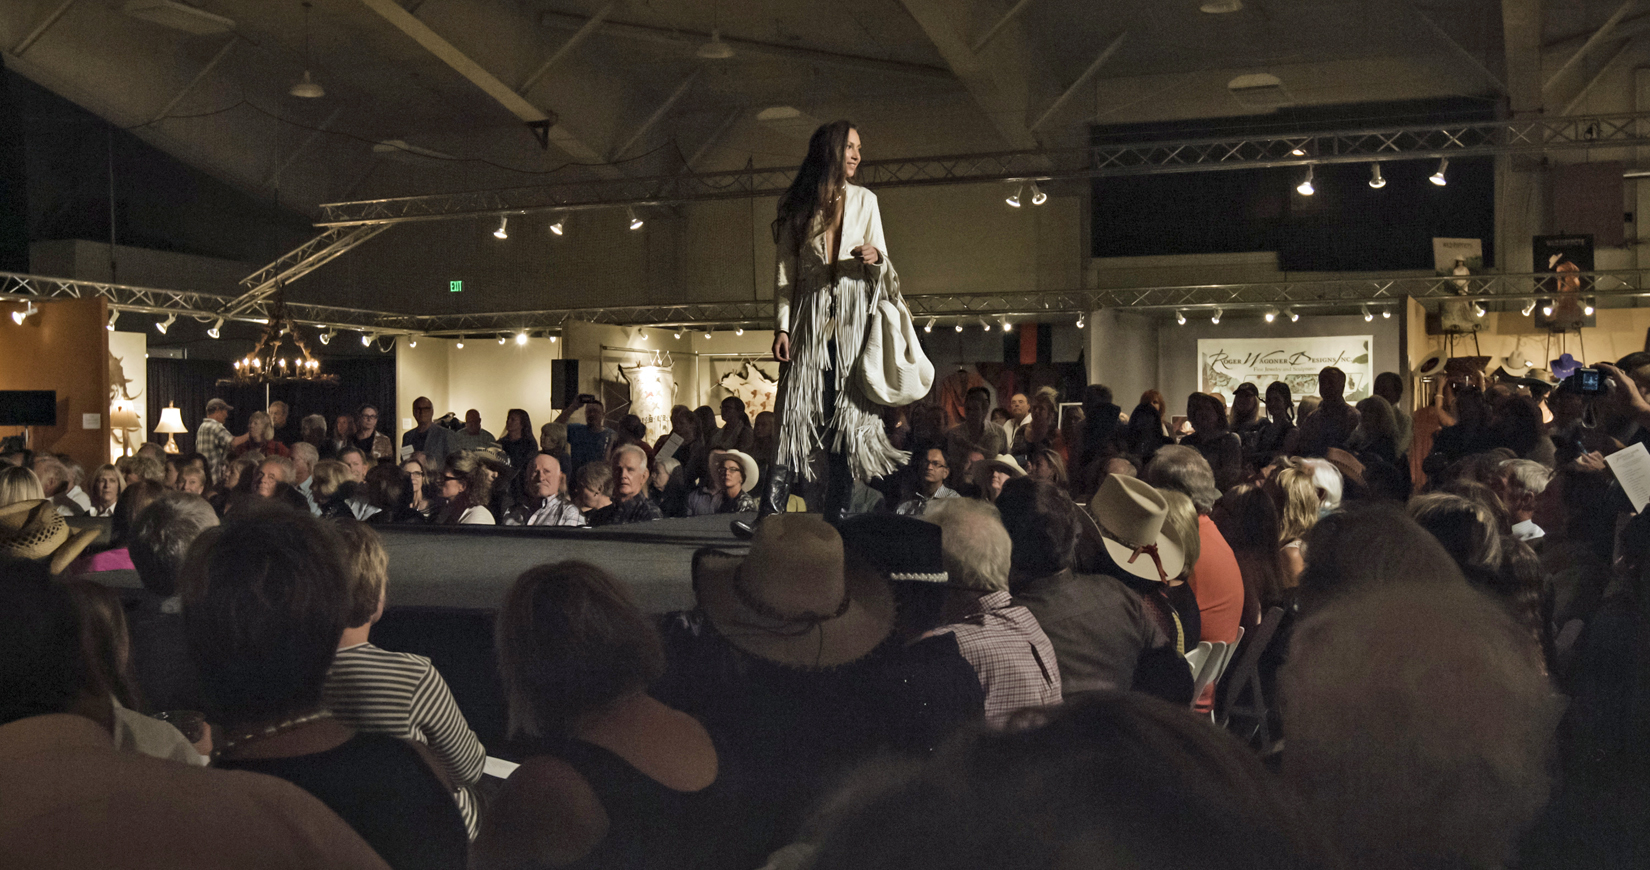 The Designer Show House will be unveiled at the Opening Preview Party of the Western Design Conference Exhibit + Sale on Sept. 7, which also features a popular live runway fashion show.